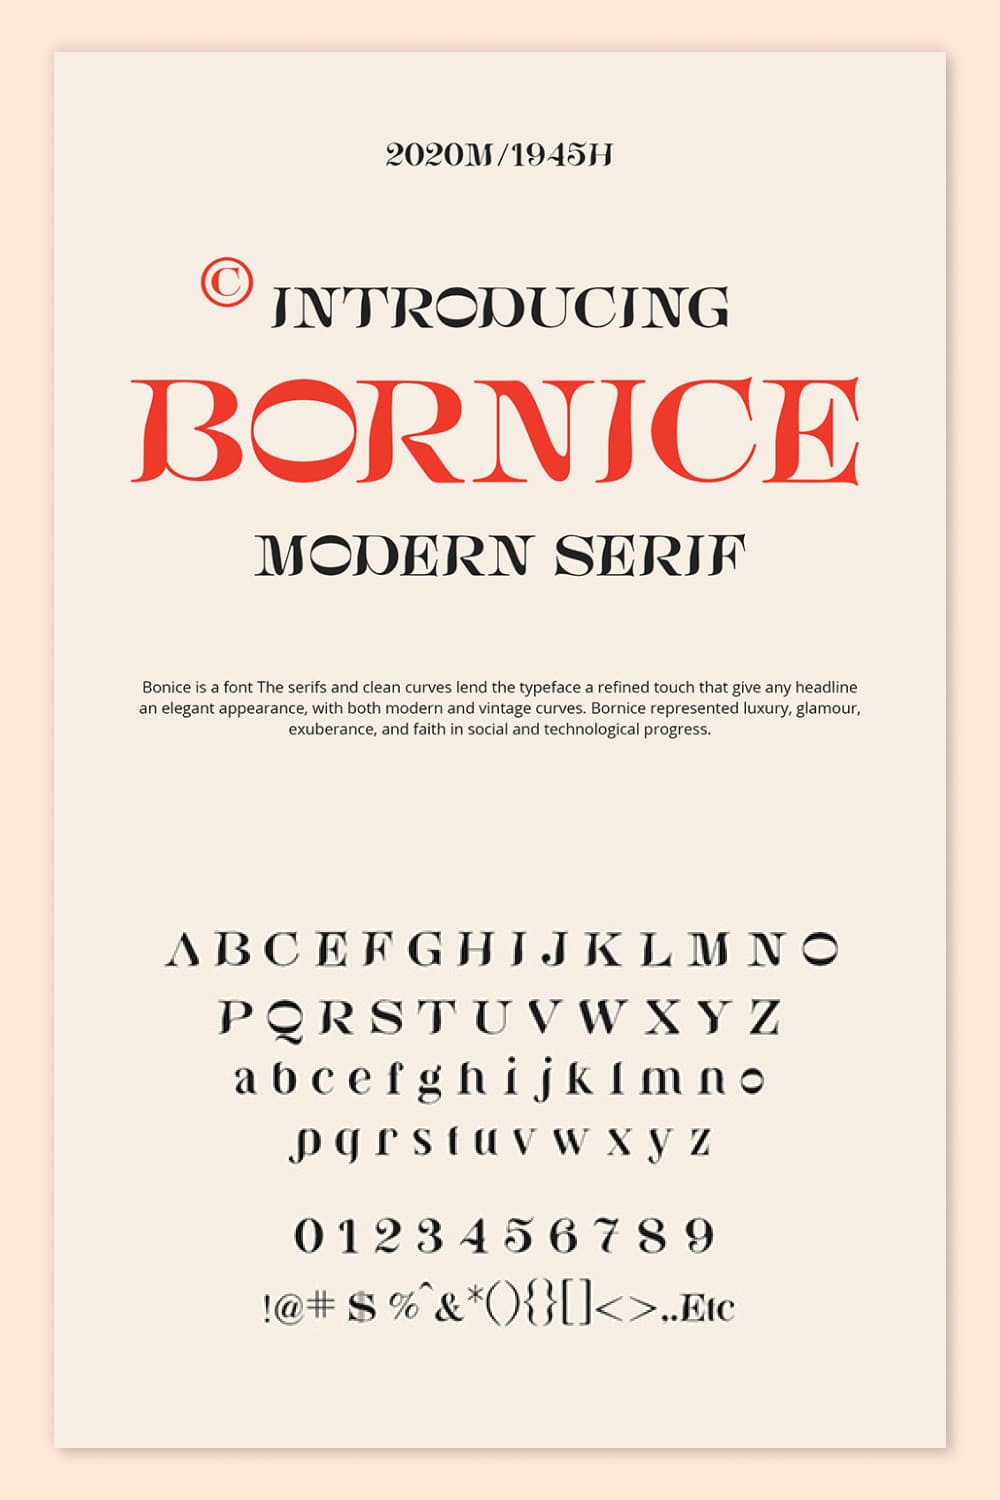 An example of a Bornice Serif Font on a beige background.